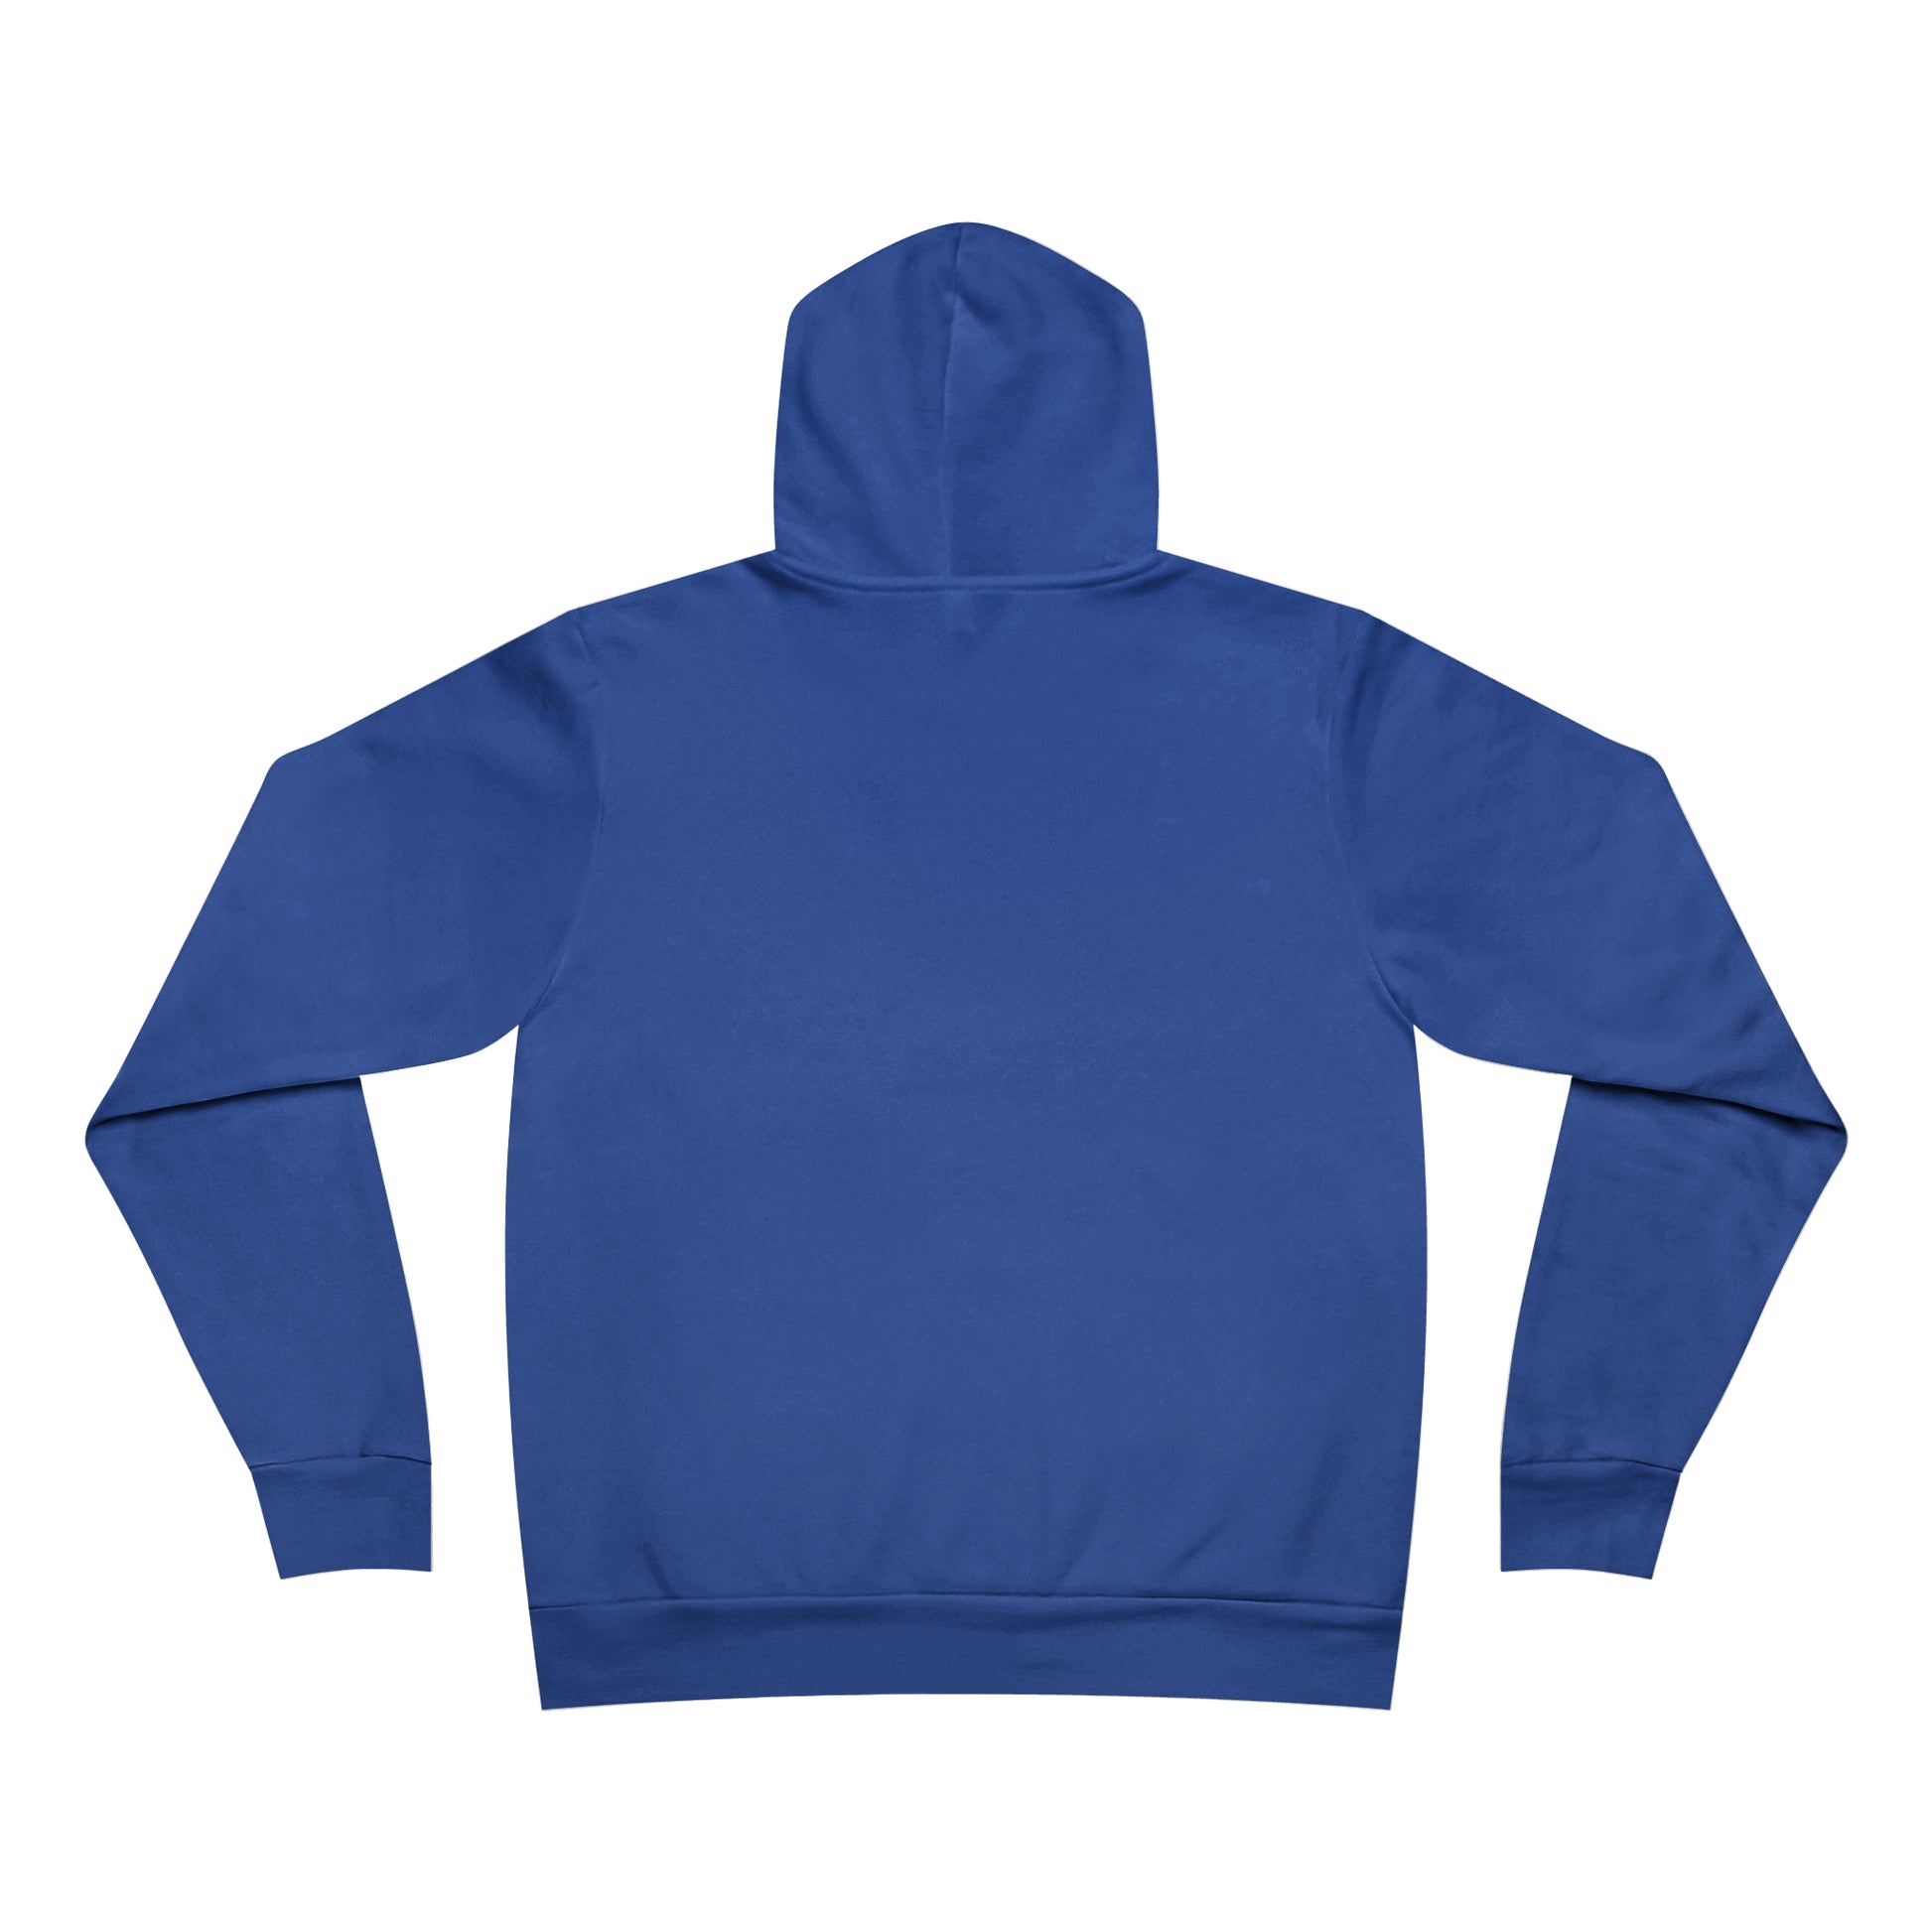 Awesome Teapot Dome Service Station - Unisex Sponge Fleece Pullover Hoodie - Fry1Productions